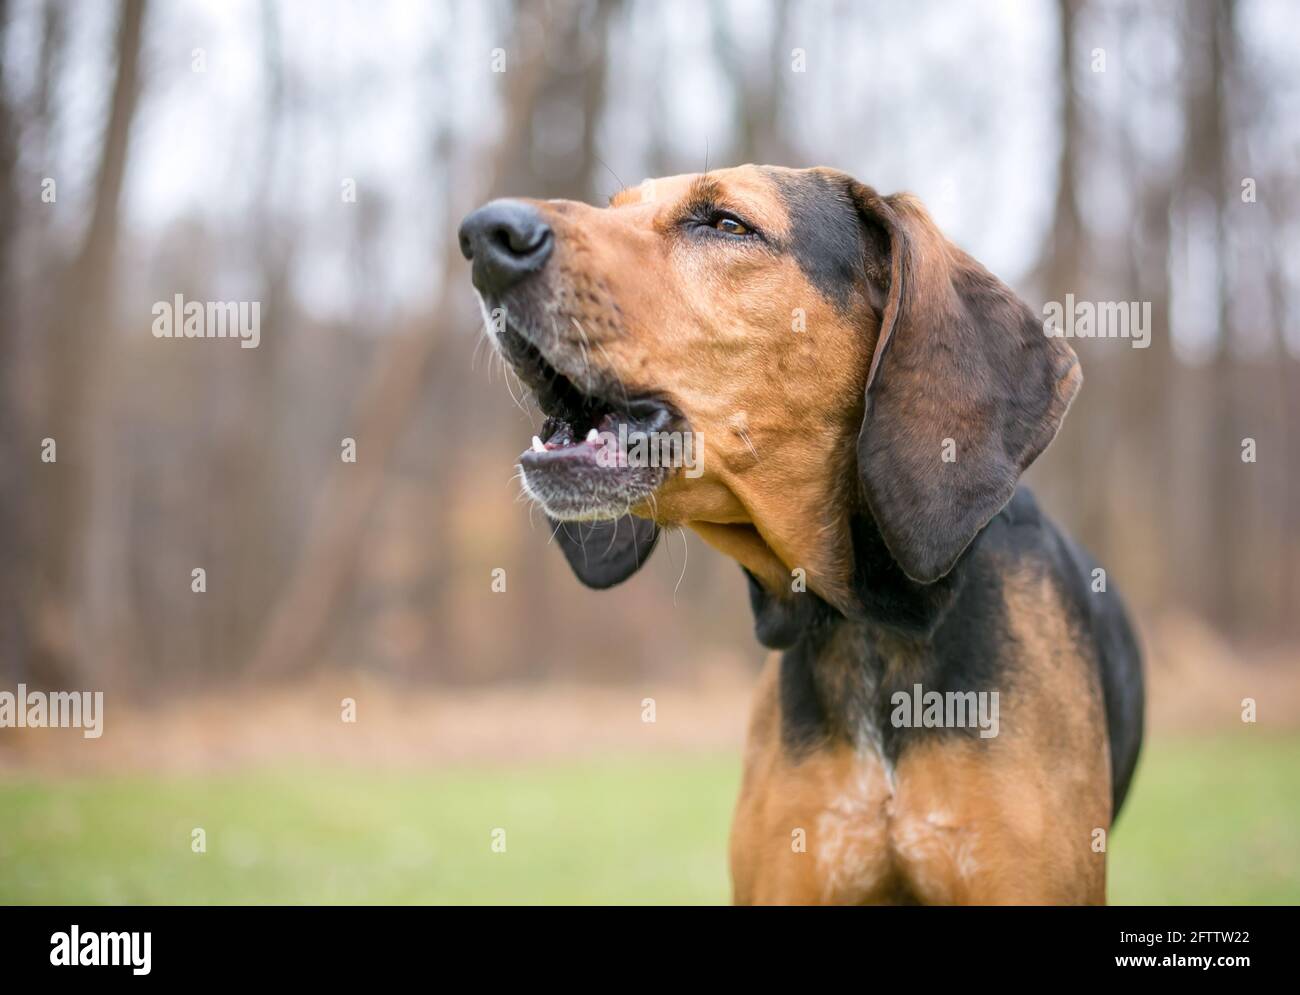 A red and black Coonhound dog barking or howling outdoors Stock Photo